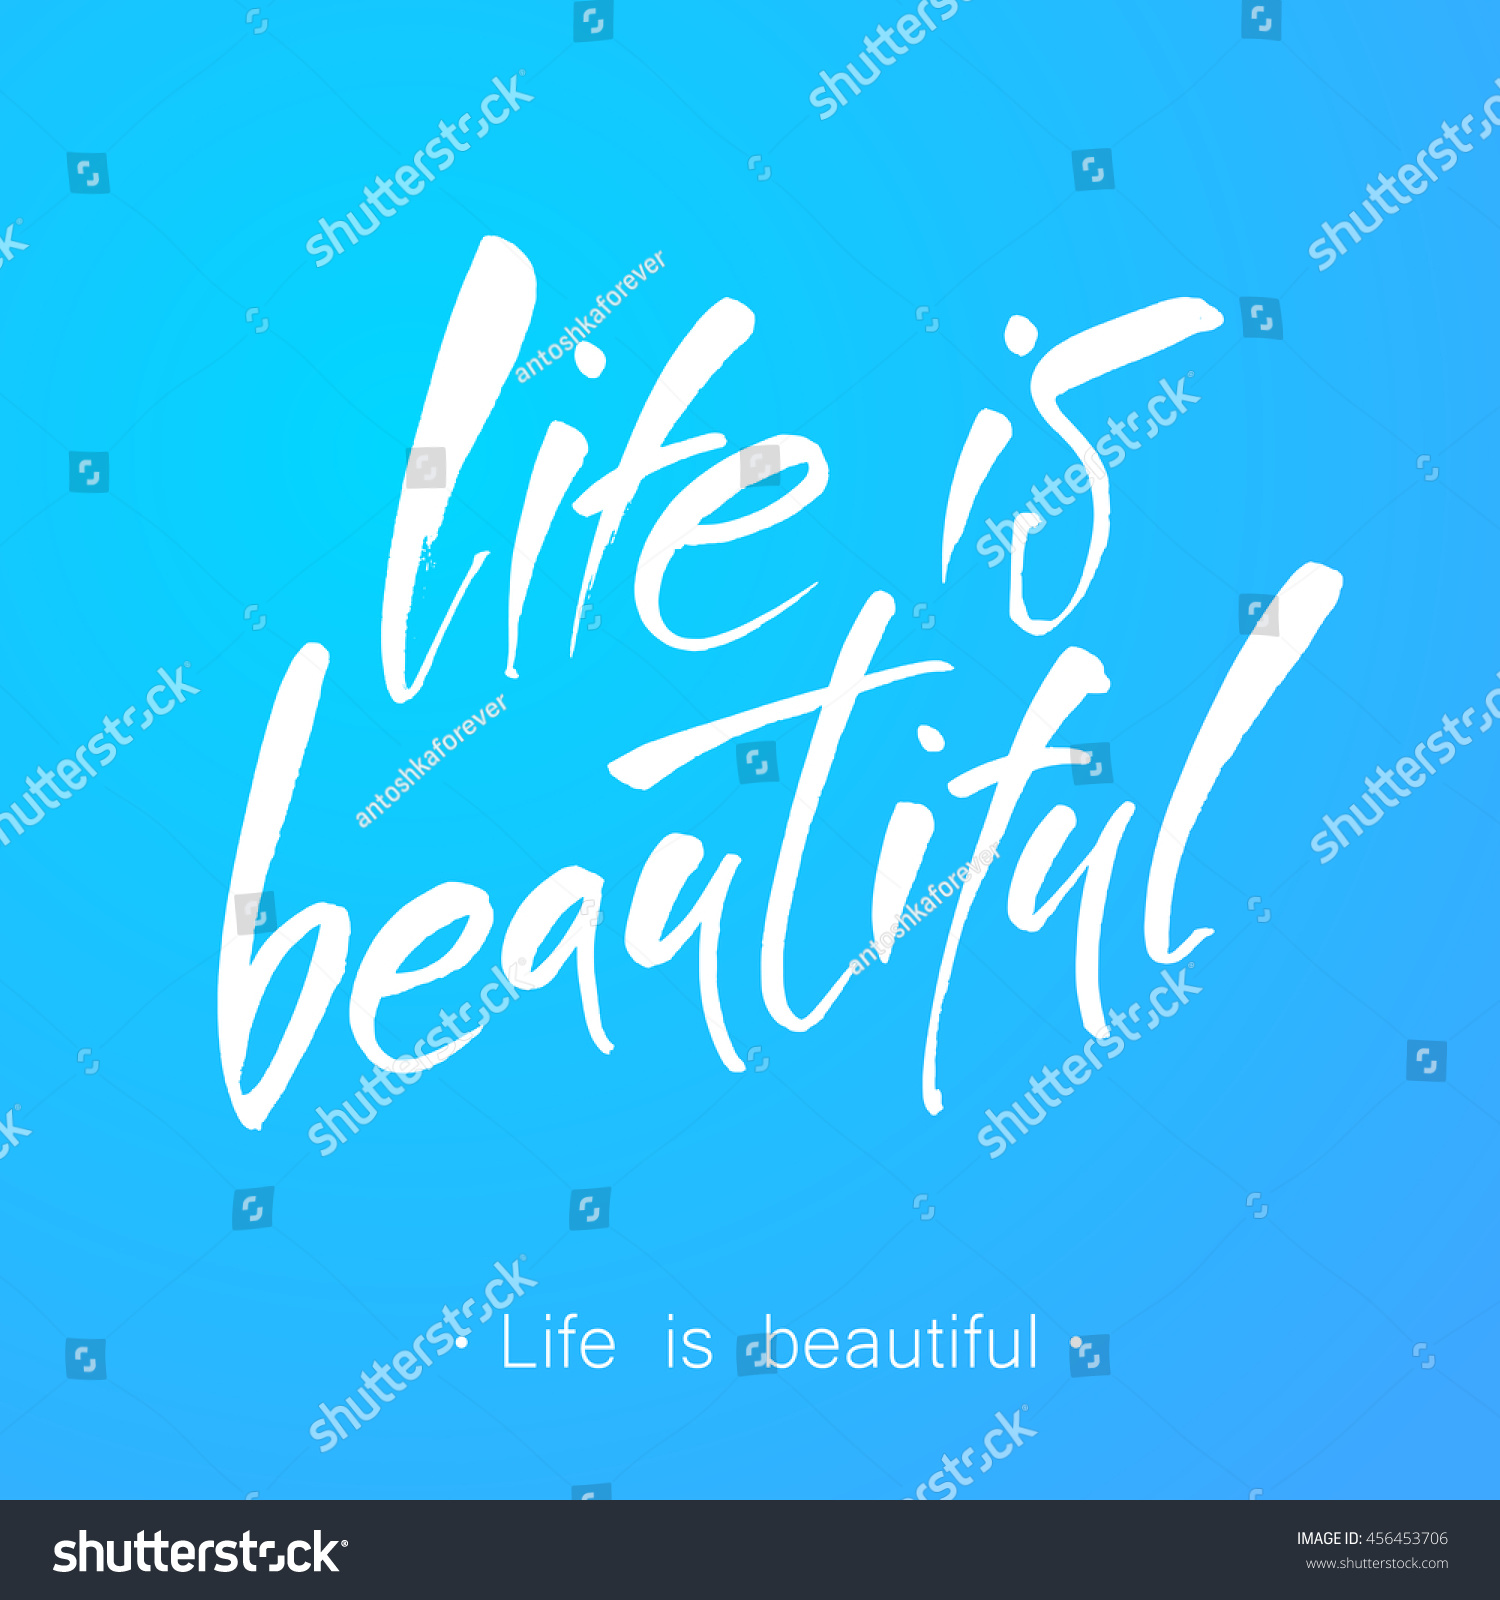 Life is beautiful Positive life quote It s a beautiful life Modern calligraphy